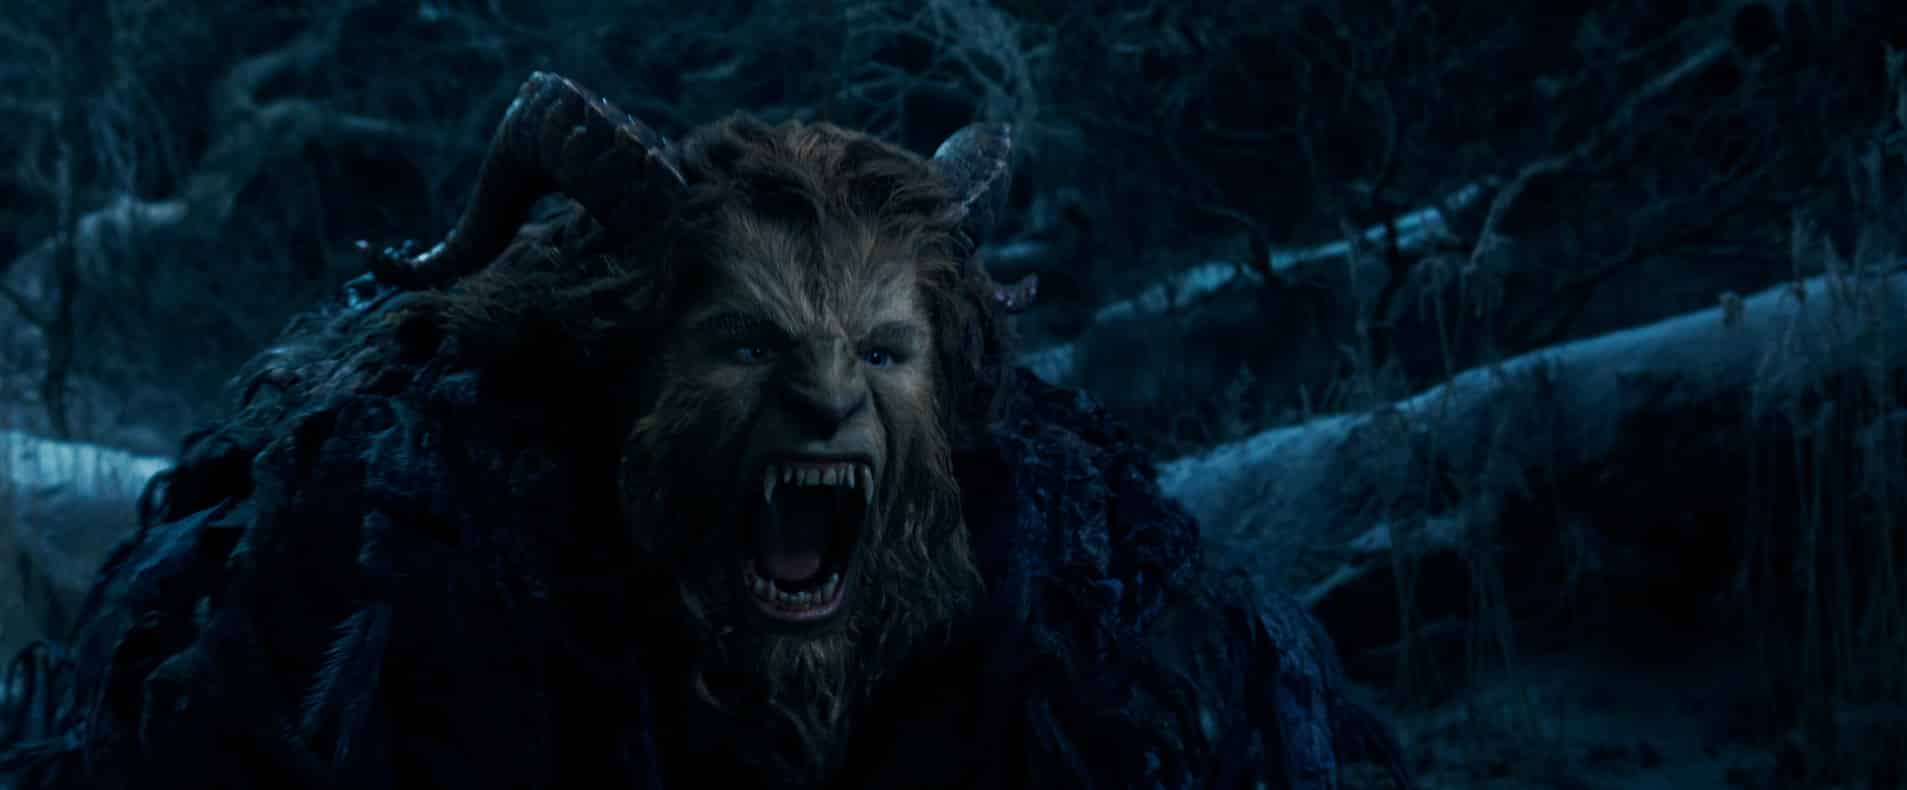 BEAUTY AND THE BEAST - New Trailer and Images! #BeOurGuest #BeautyAndTheBeast